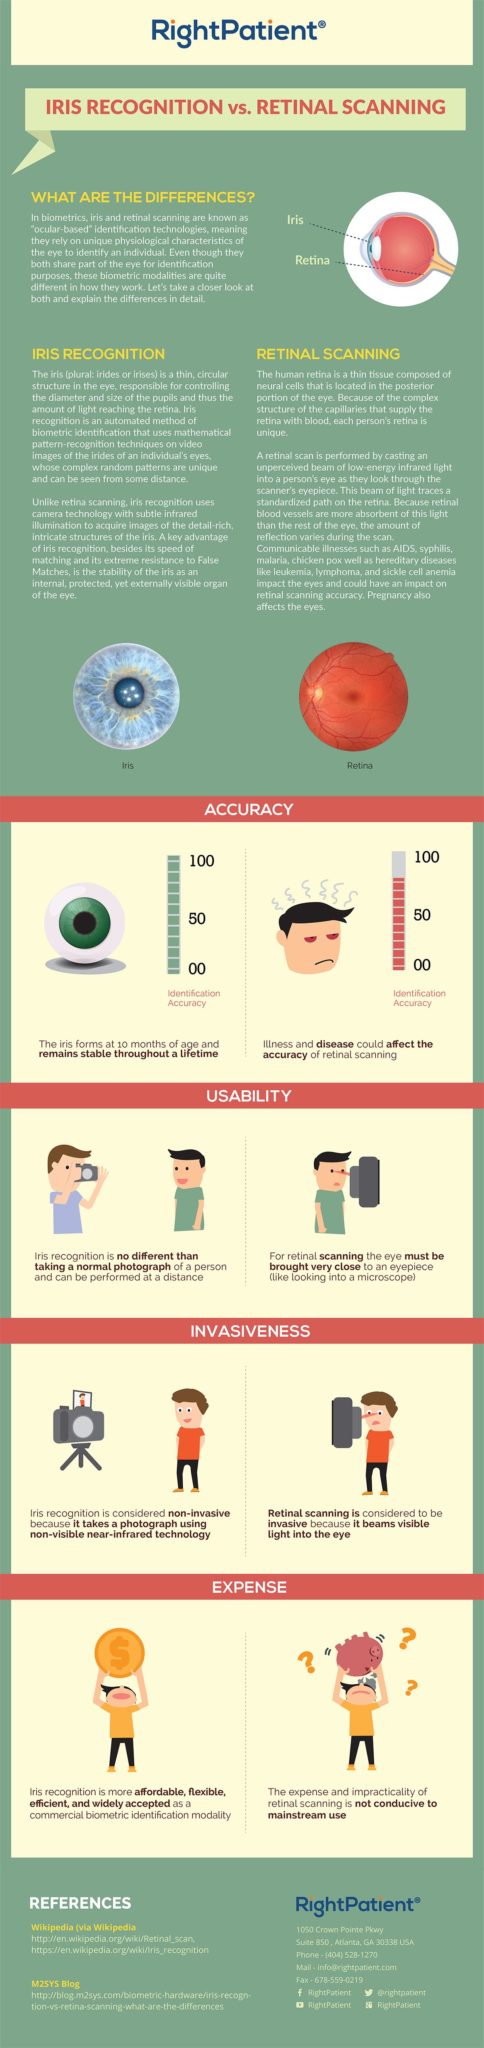 what are the differences between iris recognition and retinal scanning?